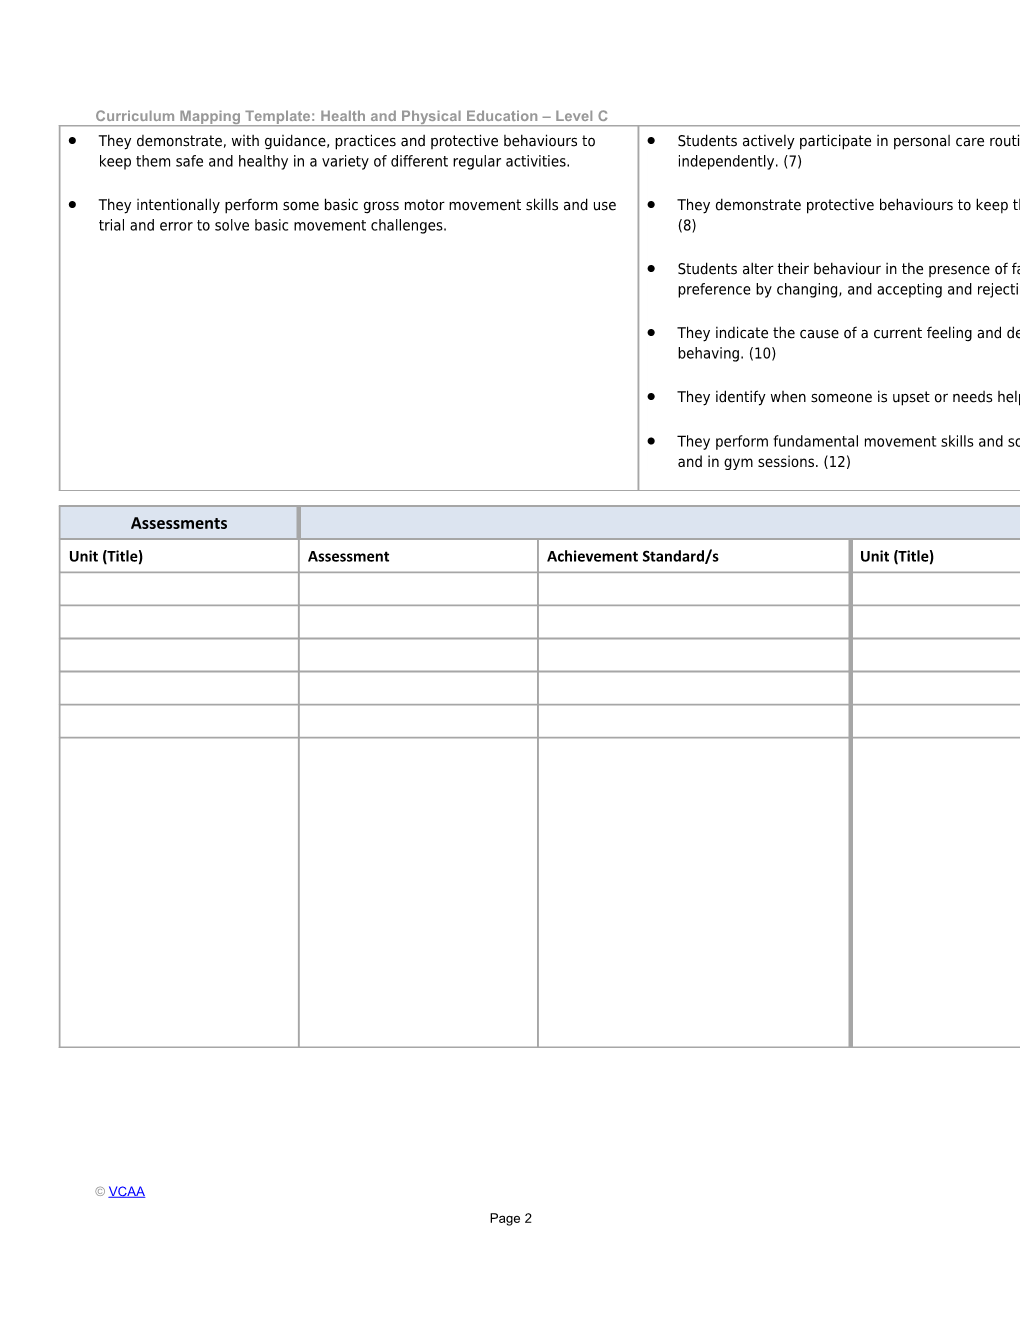 Curriculum Mapping Template: Health and Physical Education Level C